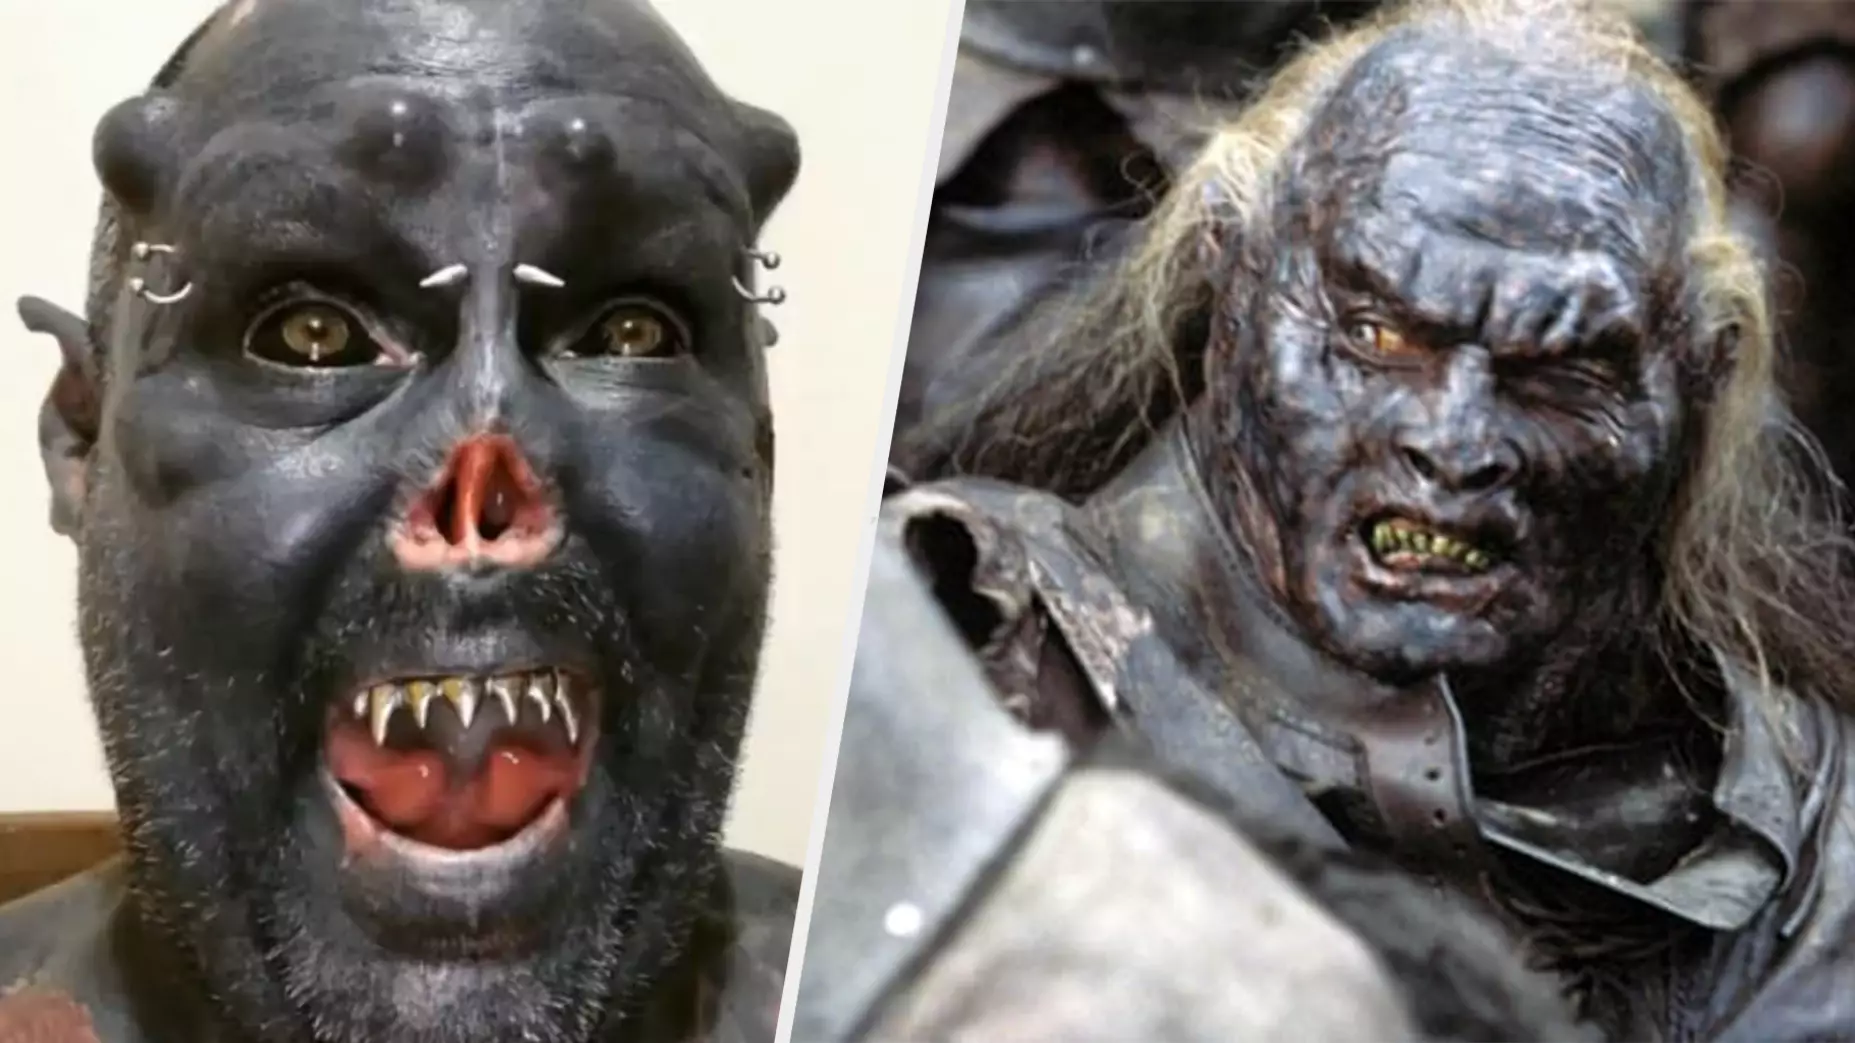 Man Cuts Off Nose In Order To Look Like Lord Of The Rings Orc